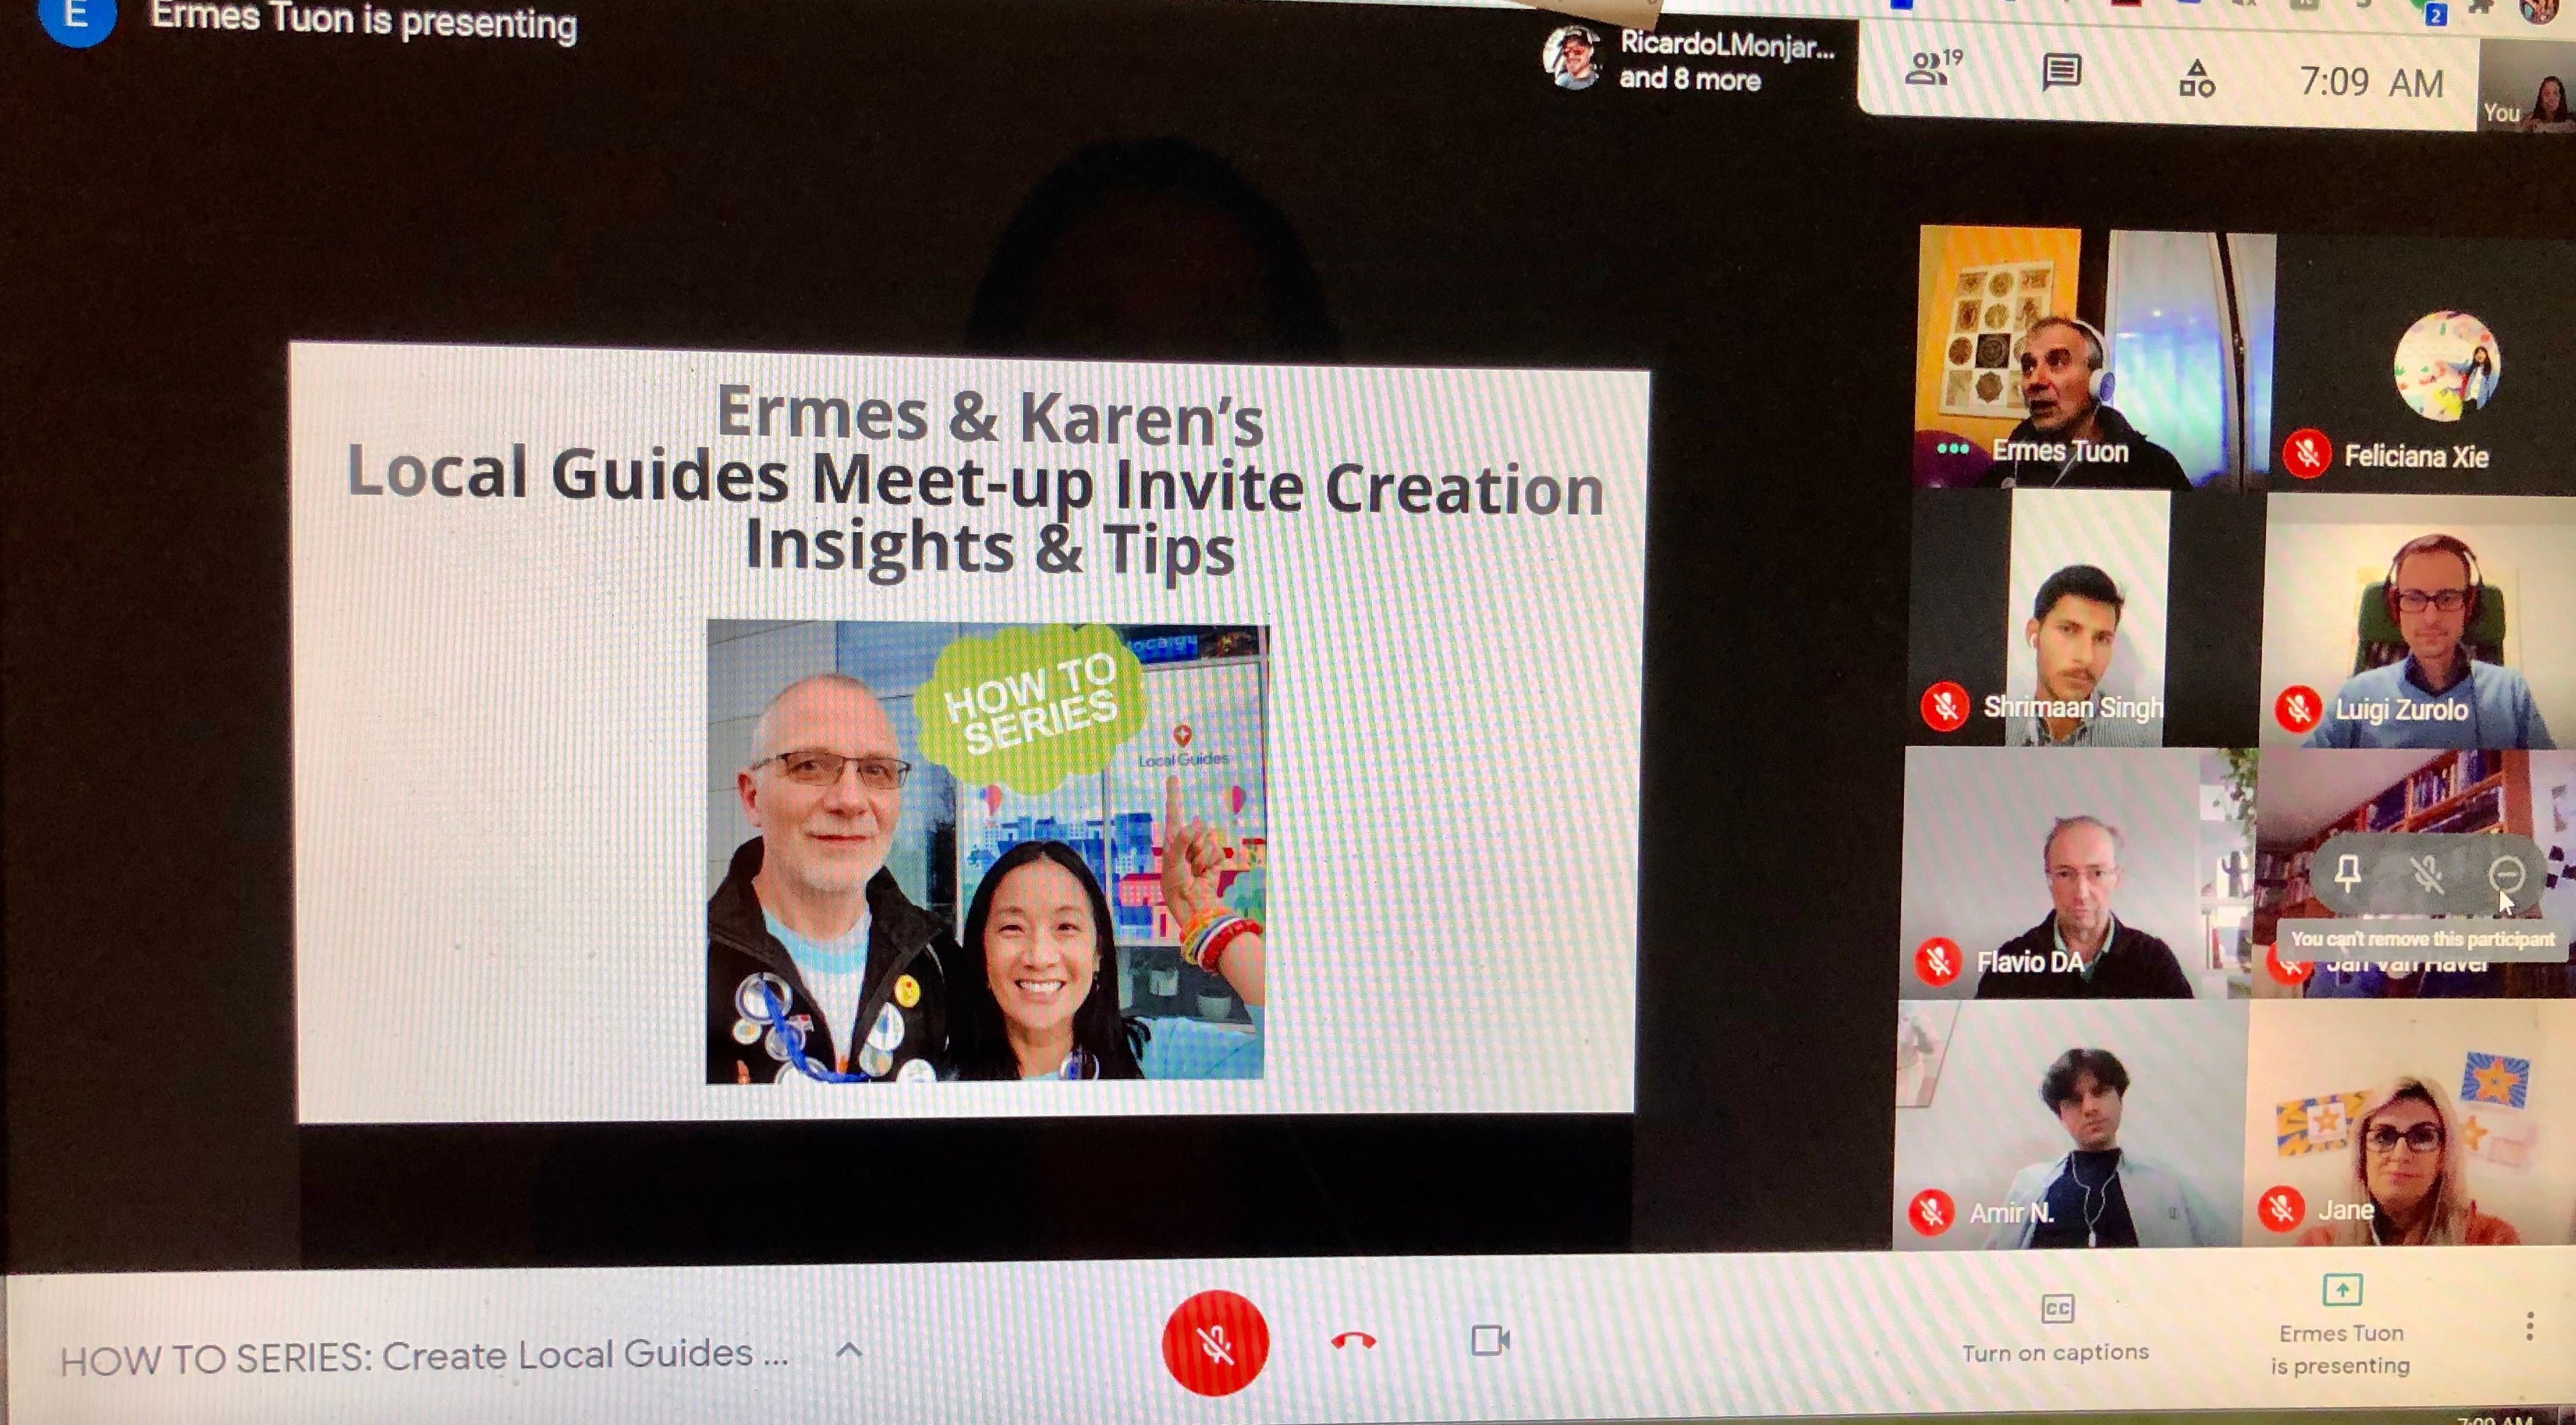 Caption: Presenting Ermes Tuon & Karen V Chin's Local Guides Meet-up Invite Creation Insights &Tips as part of HOW TO SERIES: Create Local Guides Virtual Meet-up Invite Talk. Screenshot: @karenvchin